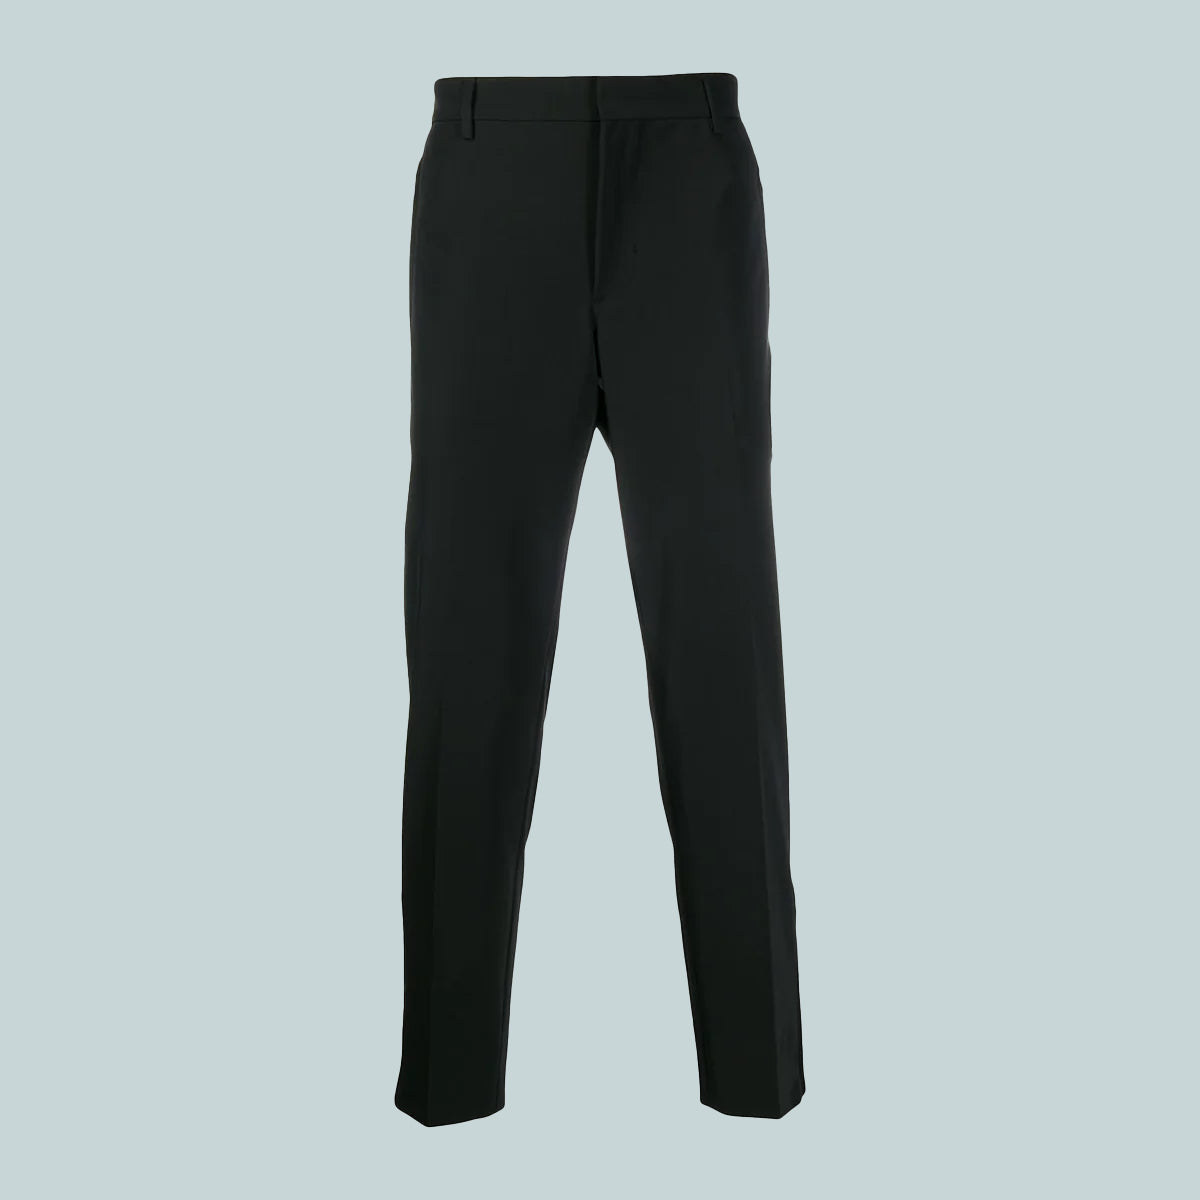 Classic tailored trousers